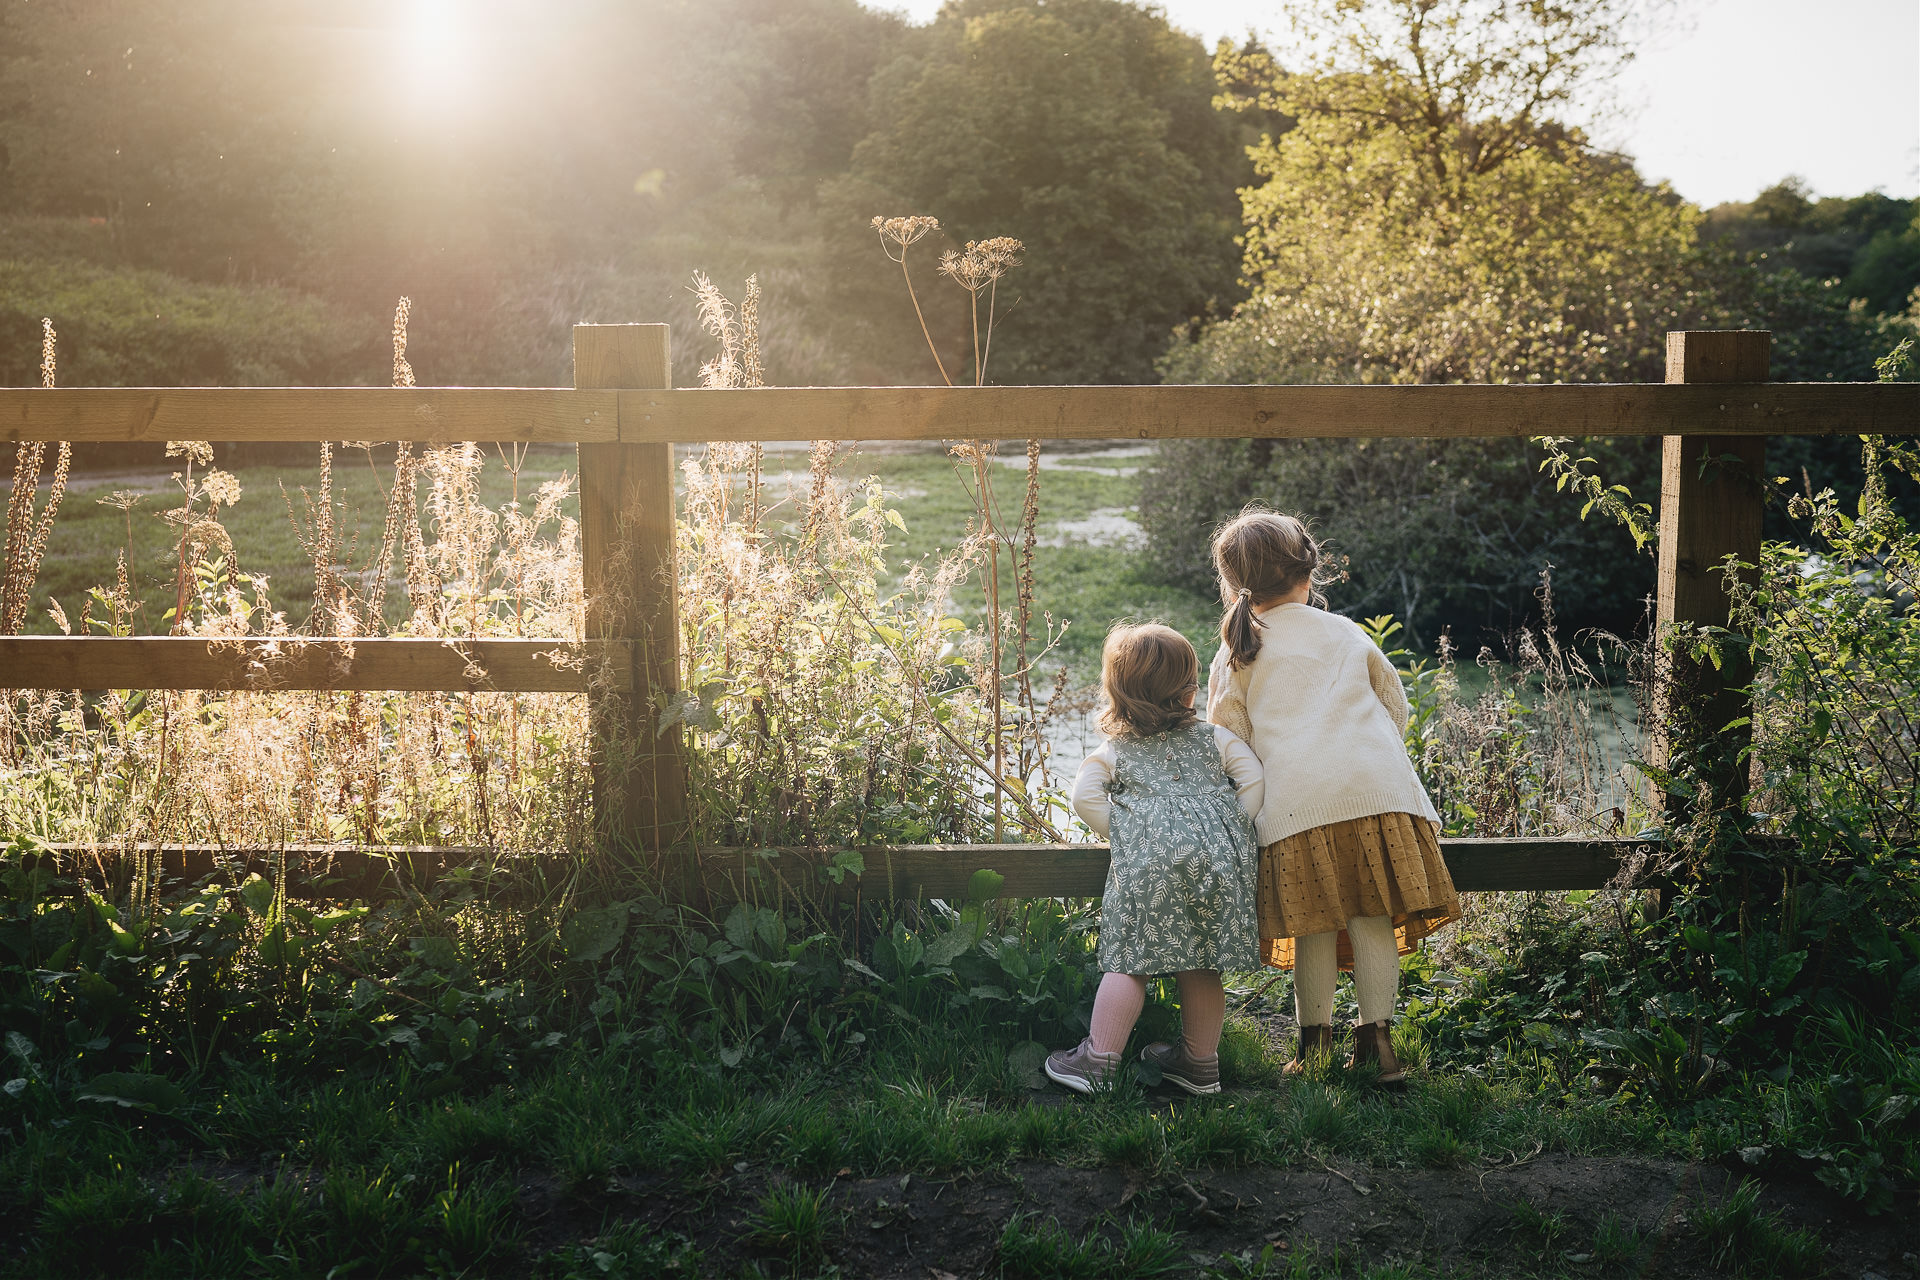 Two children peeping through a fence at a lake in evening sunlight